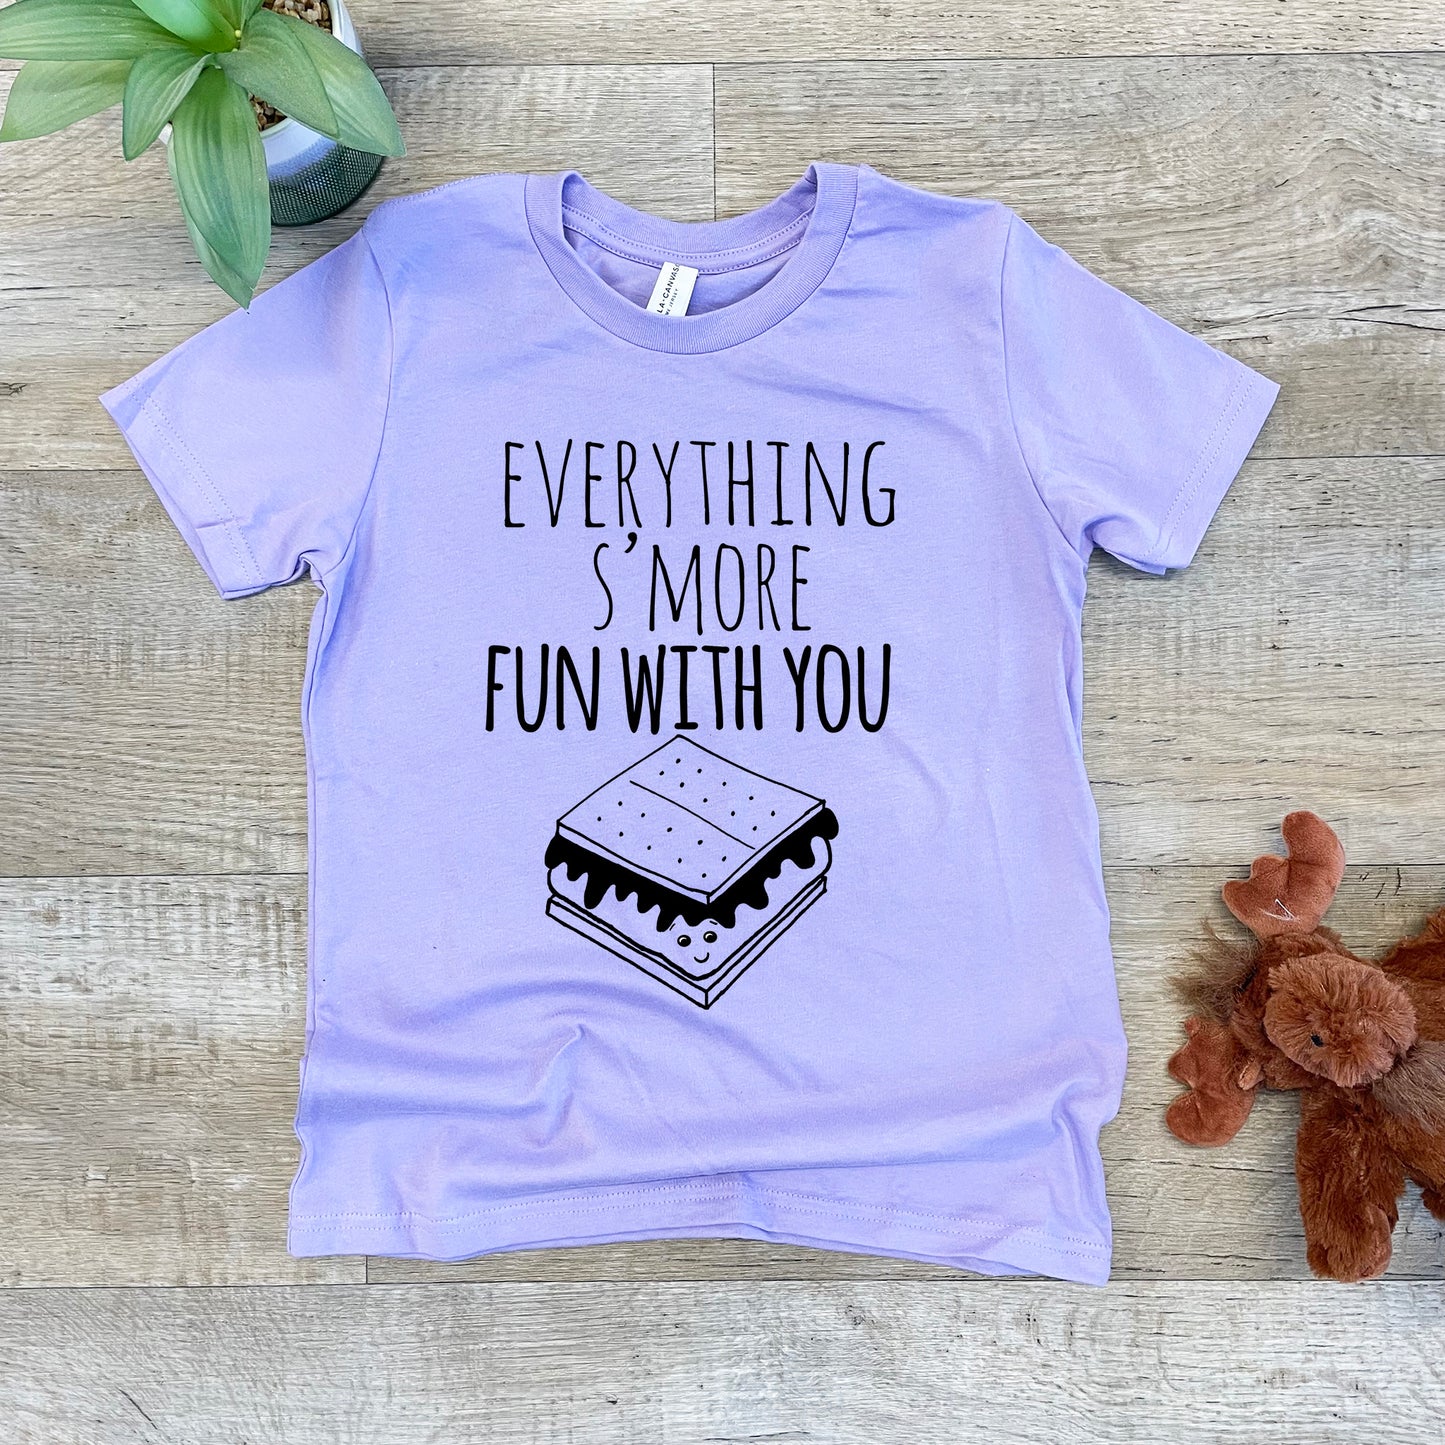 Everything S'more Fun With You - Kid's Tee - Columbia Blue or Lavender